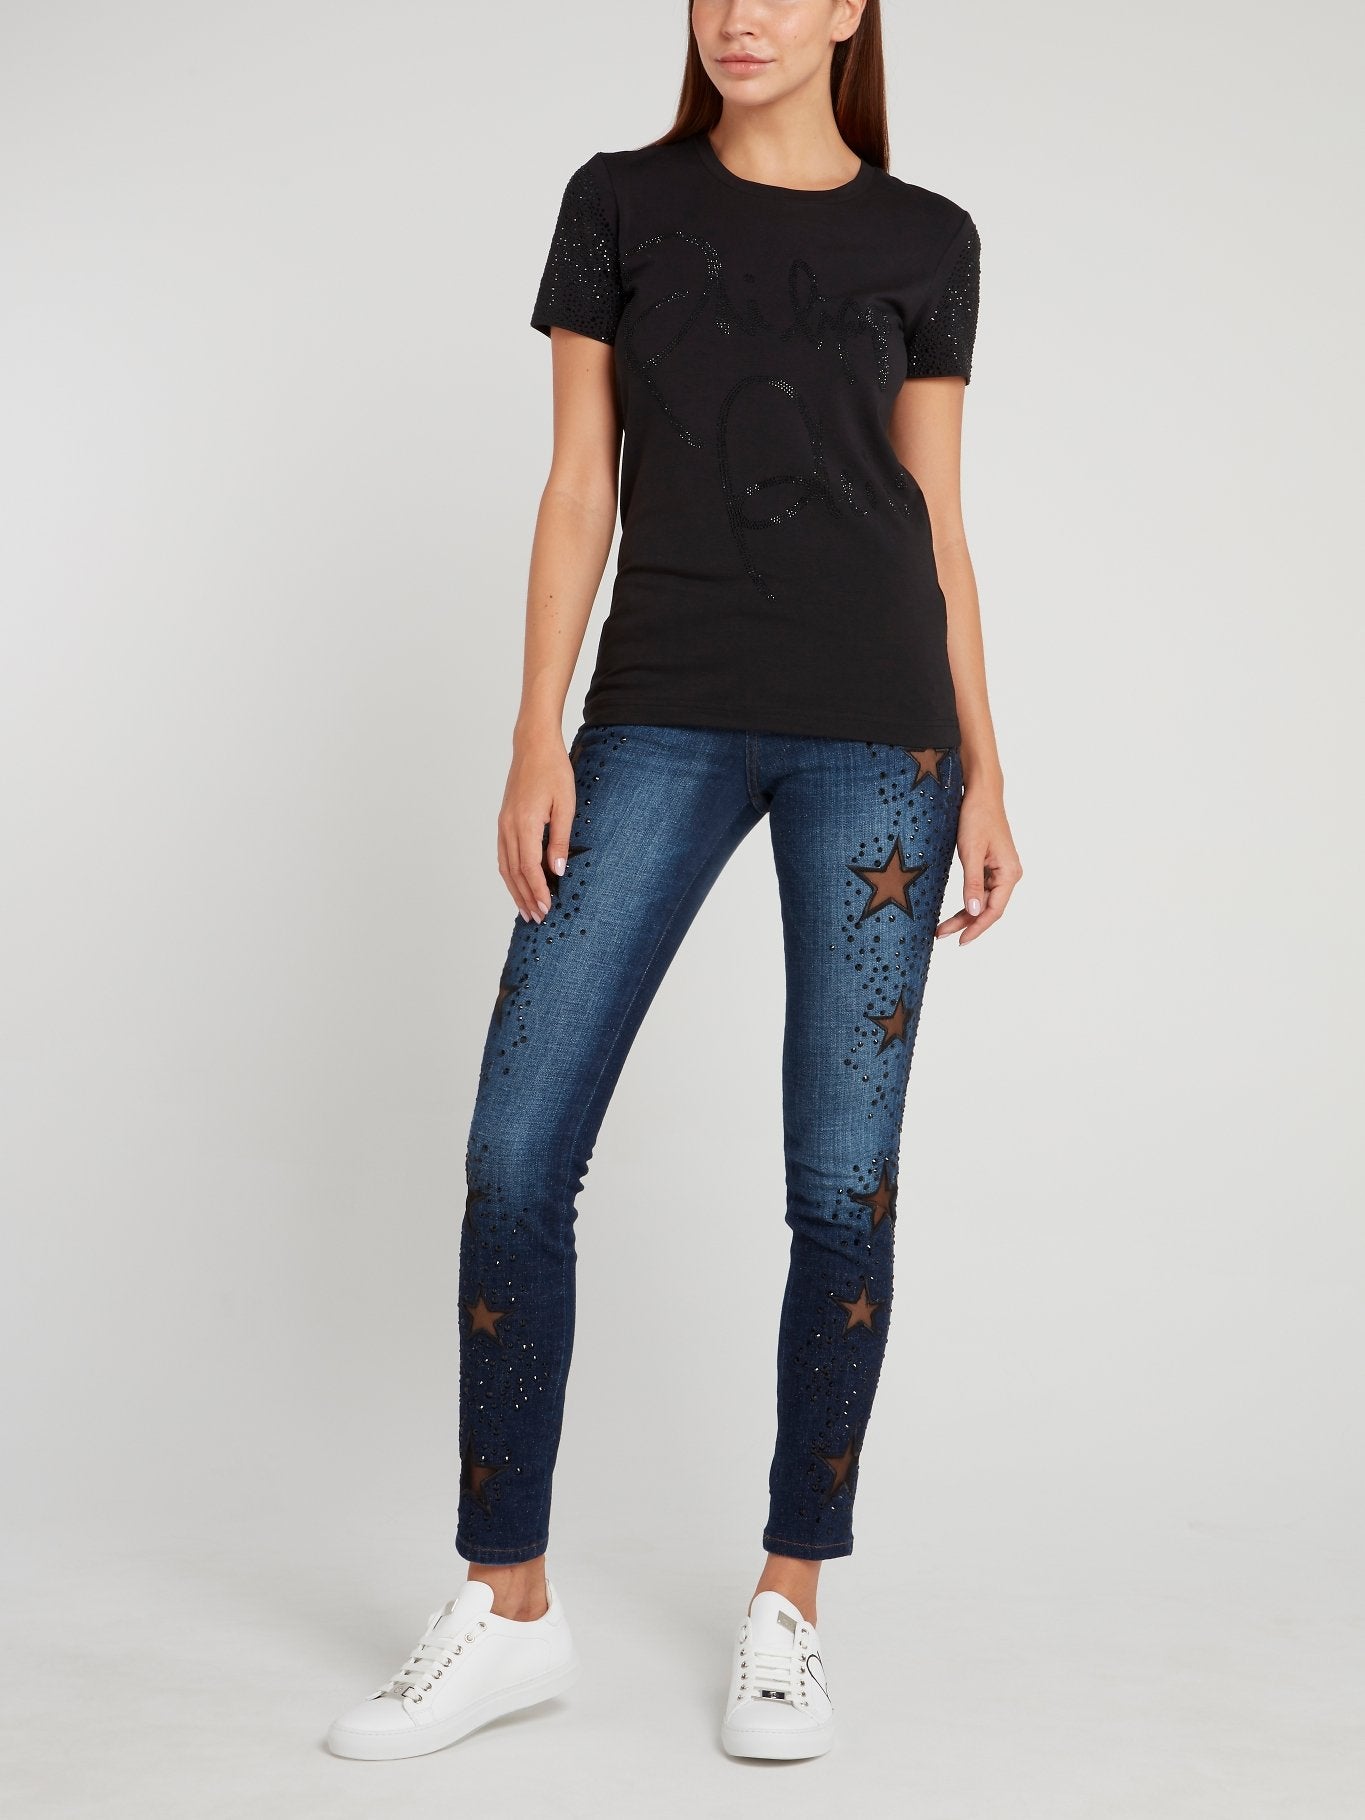 Keira Syll Navy Studded Jeggings